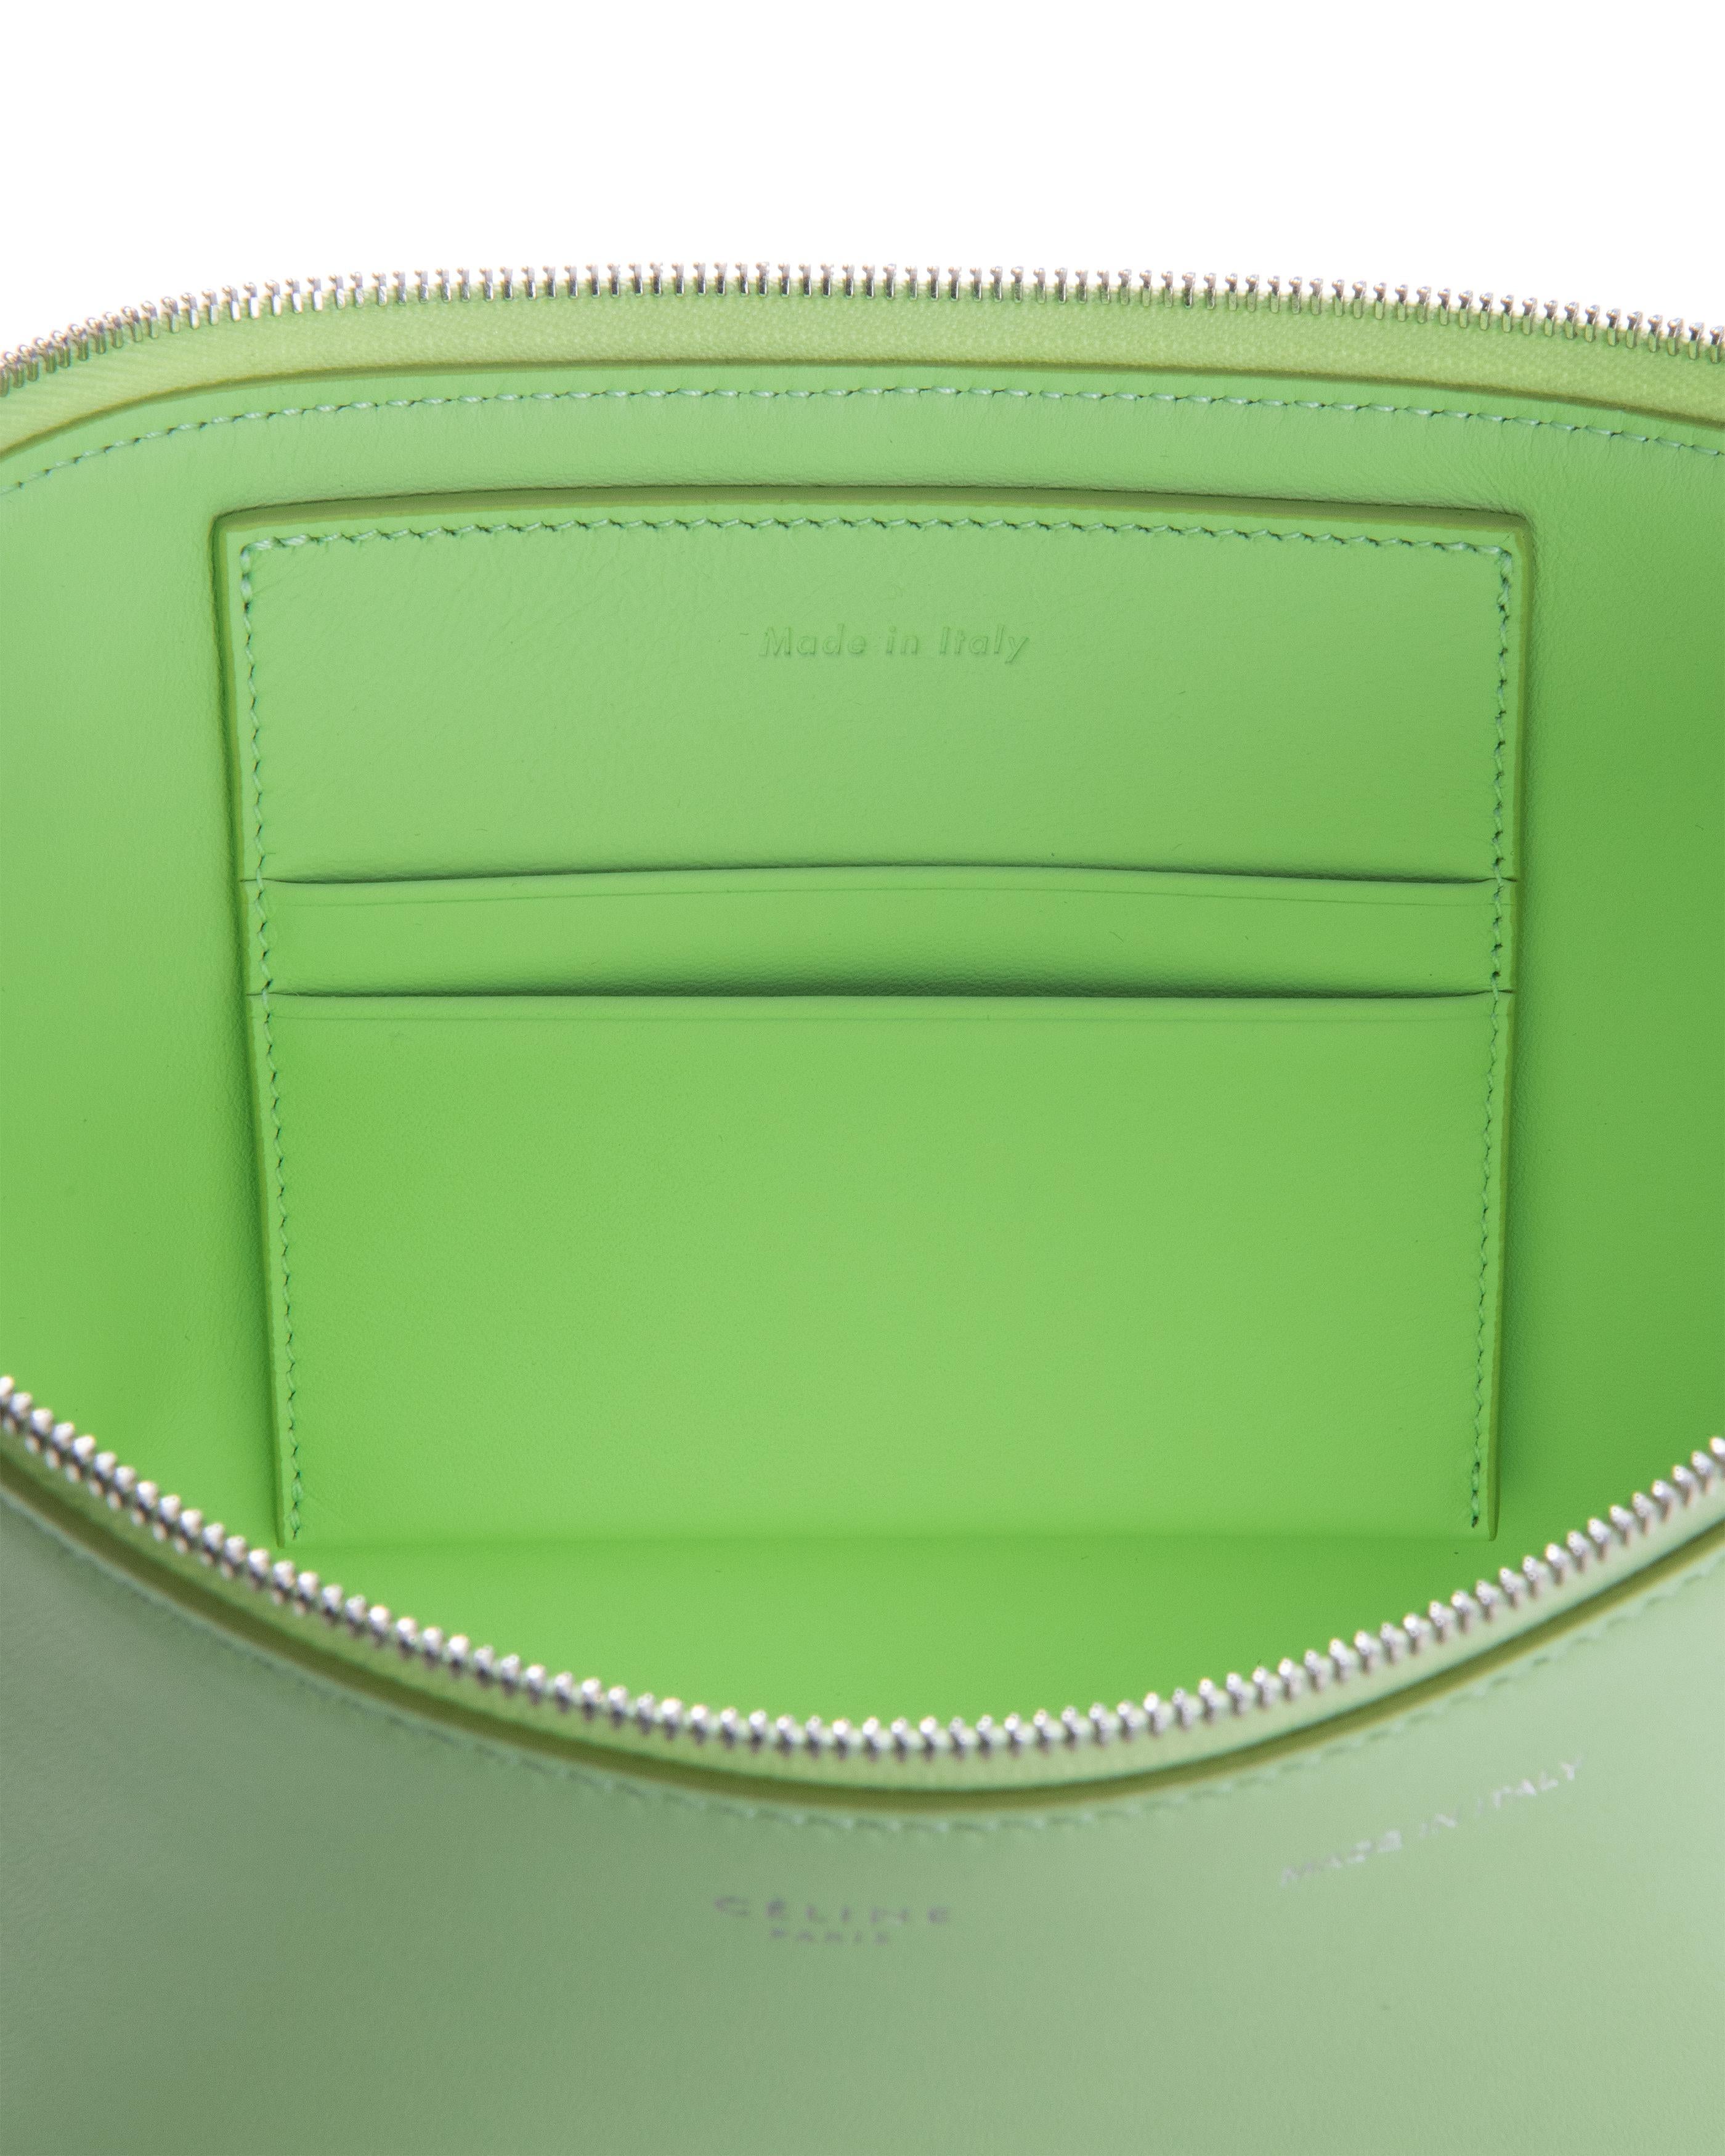 S/S 2018 Old Céline by Phoebe Philo PVC Handbag with Green Interior Clutch For Sale 6